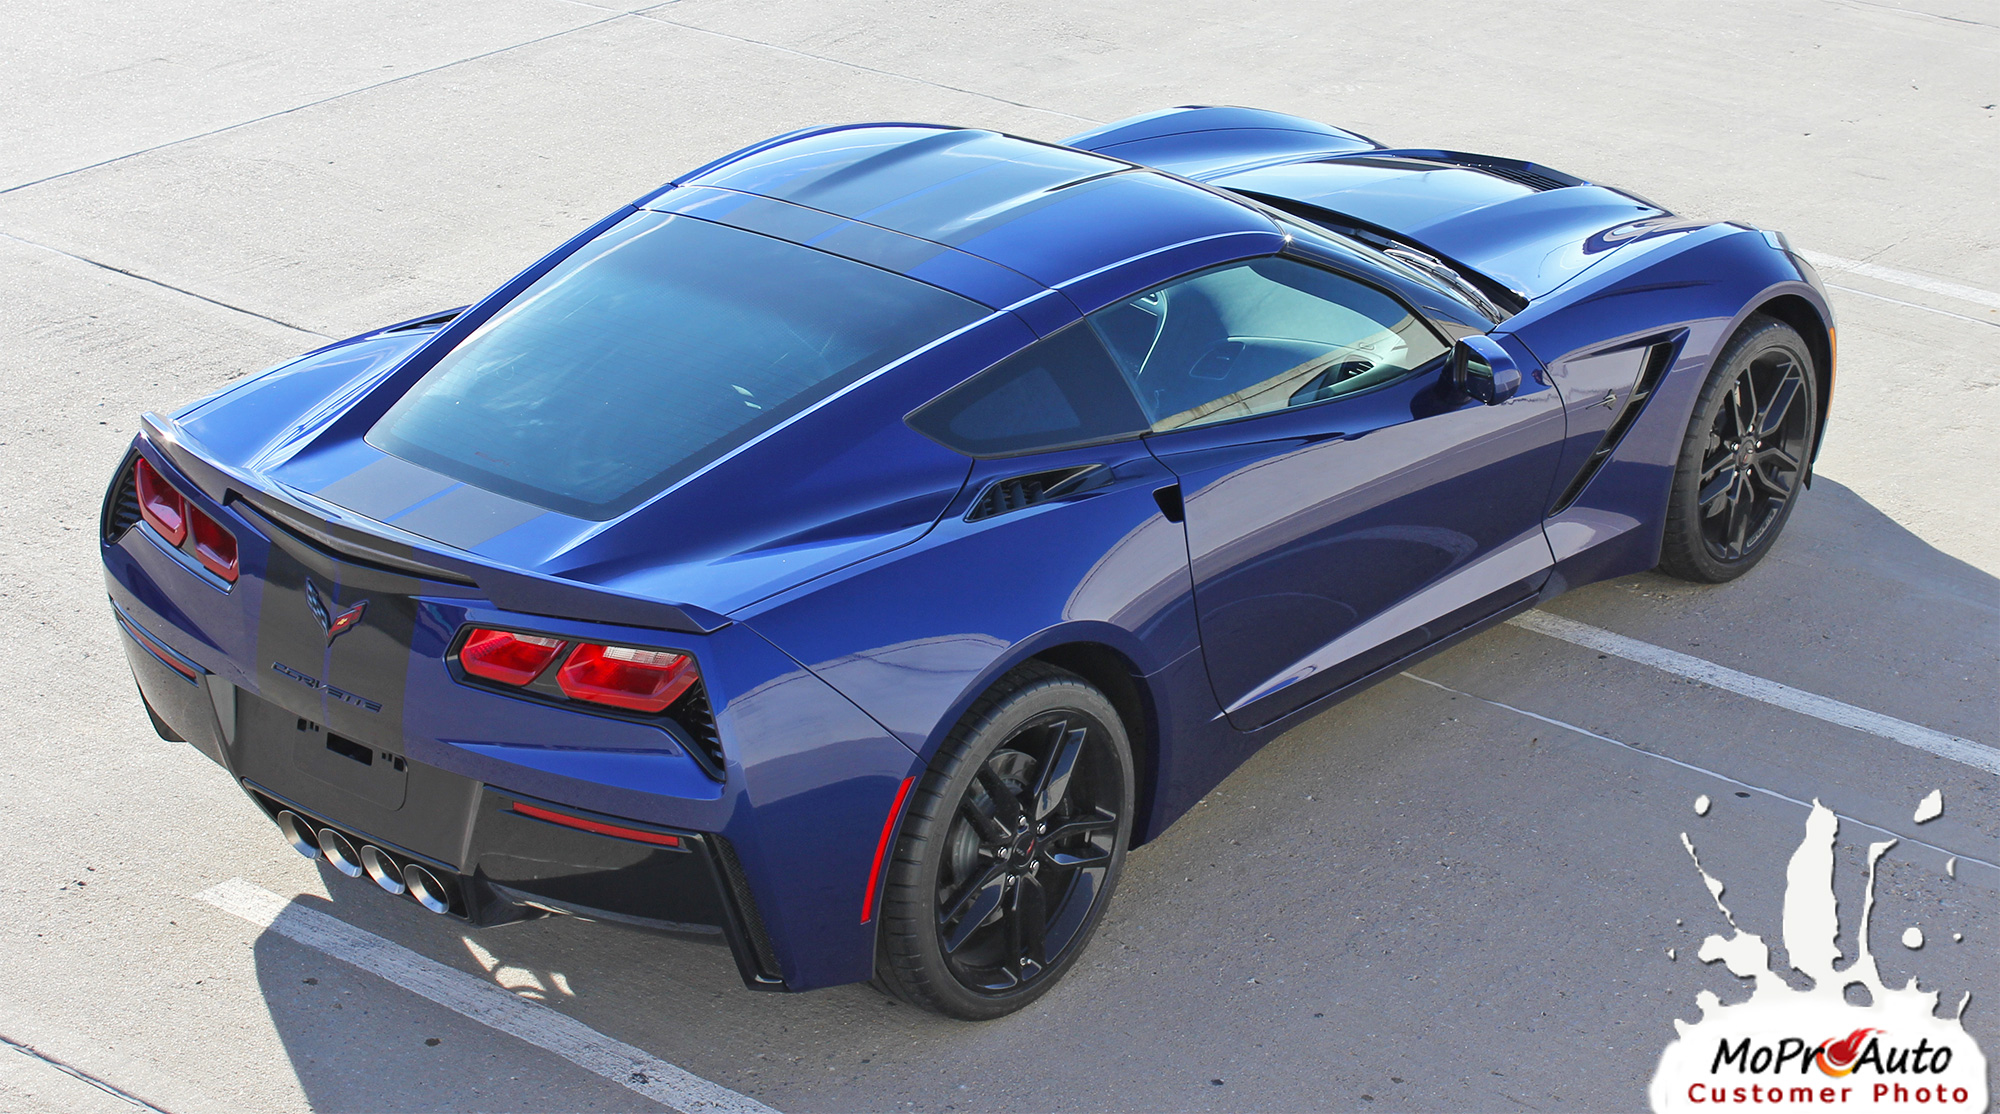 Chevy Corvette C7 Hood Blackout Vinyl Graphics Stripes Striping and Decal Kits for 2014 2015 2016 2017 2018 2019 Models